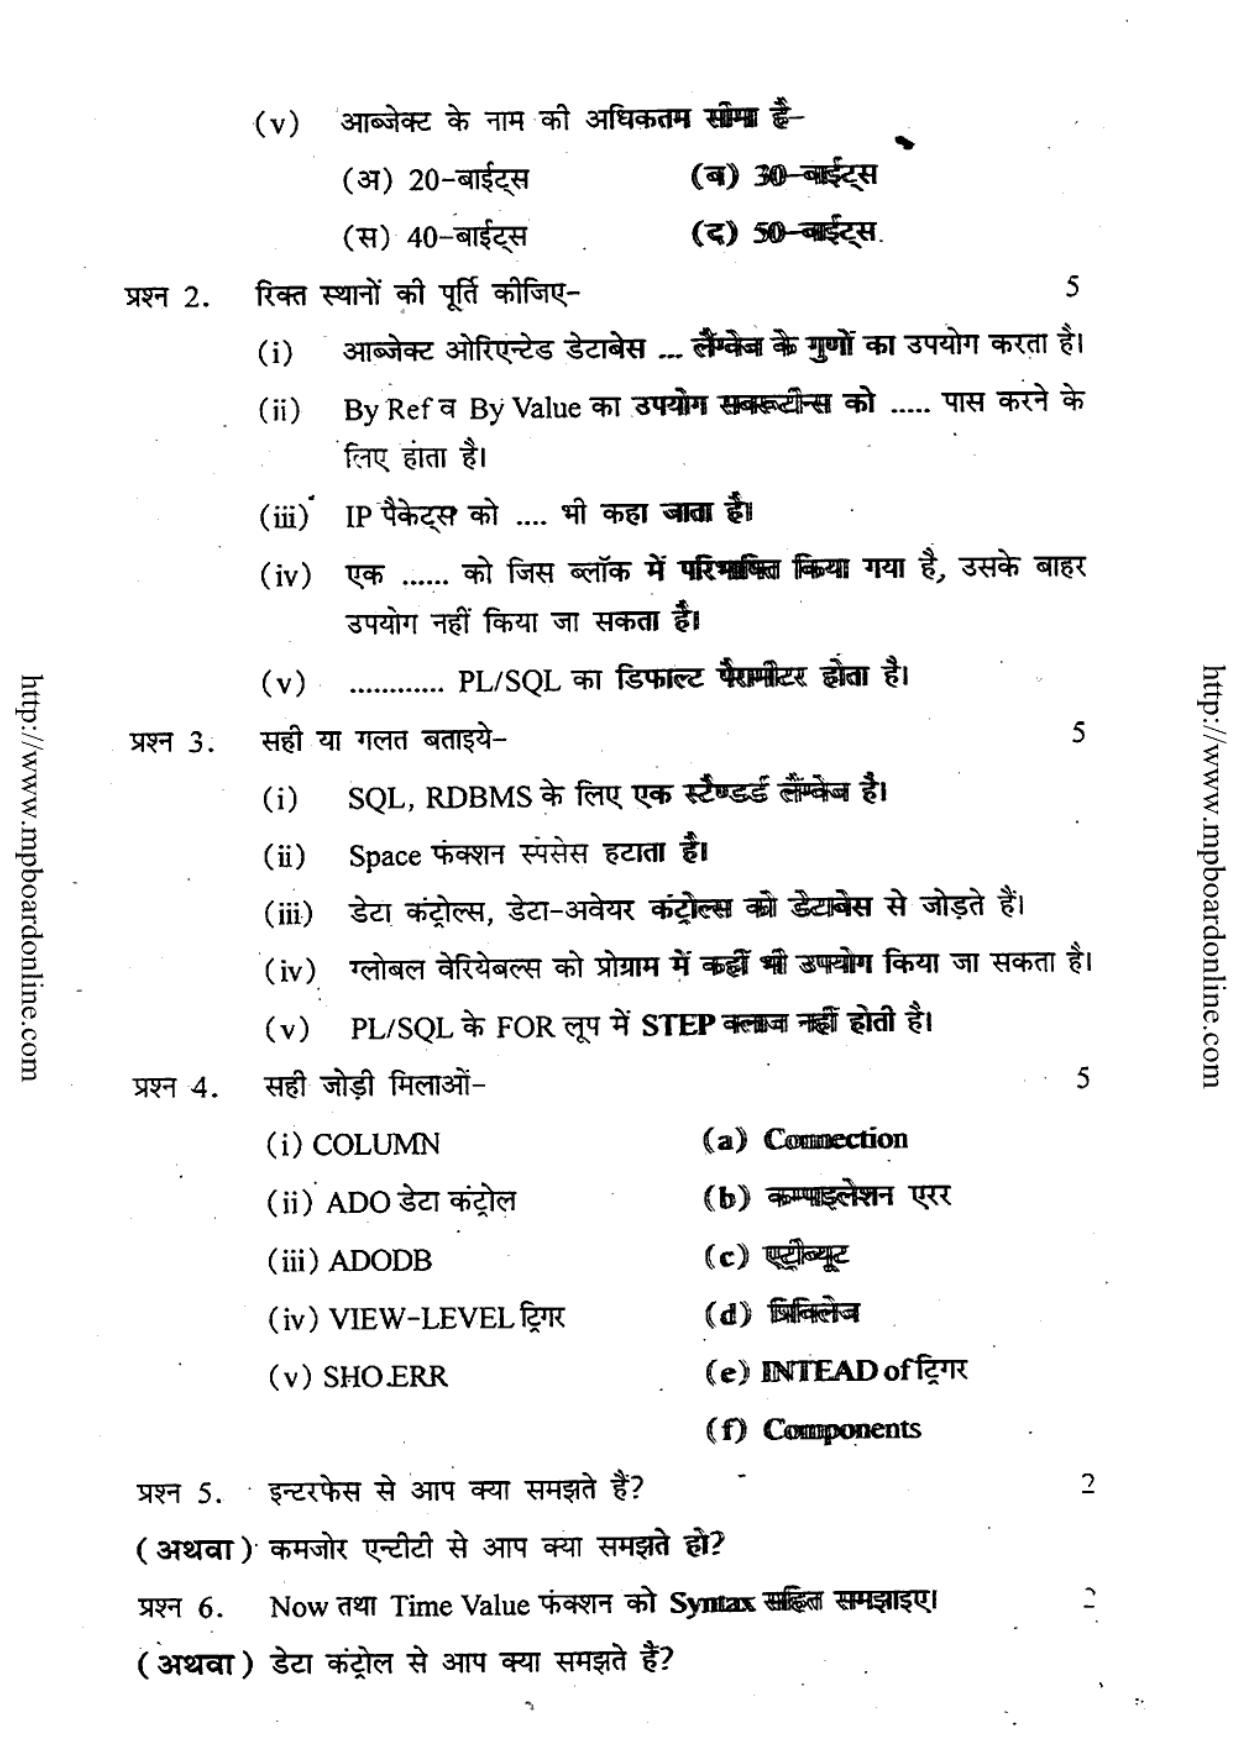 MP Board Class 12 Informatics Practices 2016 Question Paper - Page 2